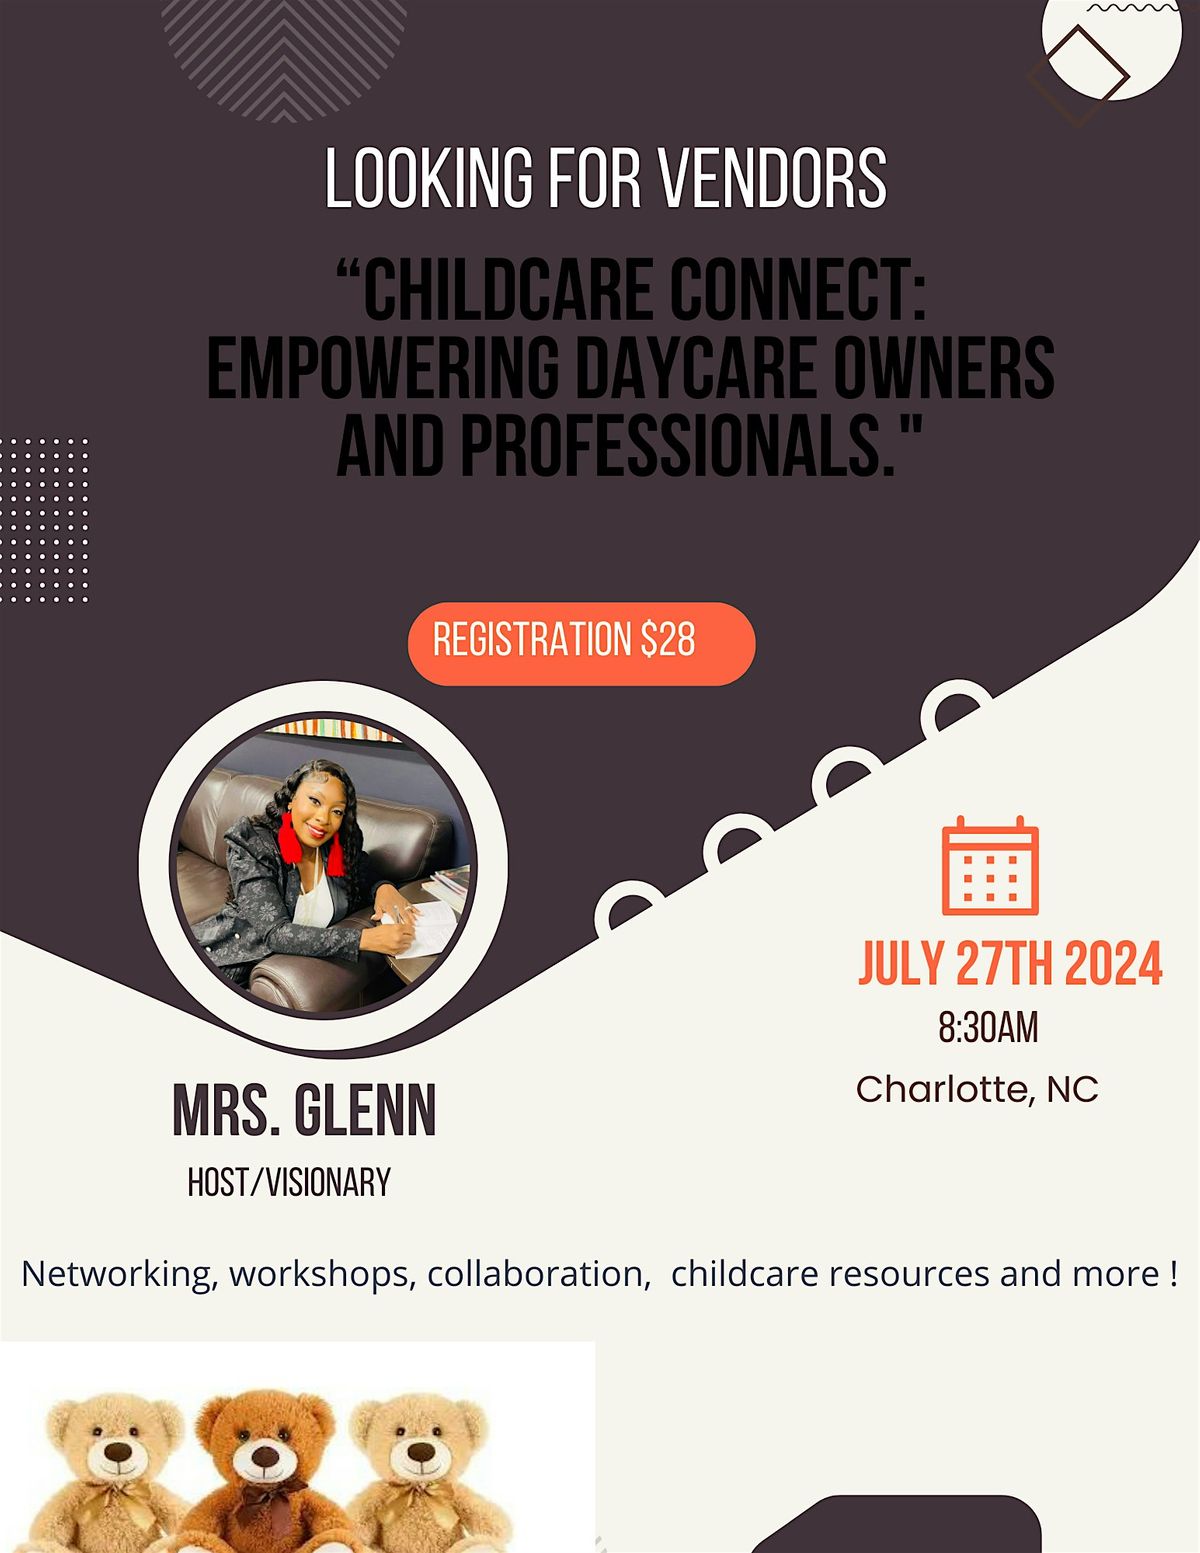 \u201cChildcare Connect: Empowering Daycare Owners and Professionals."